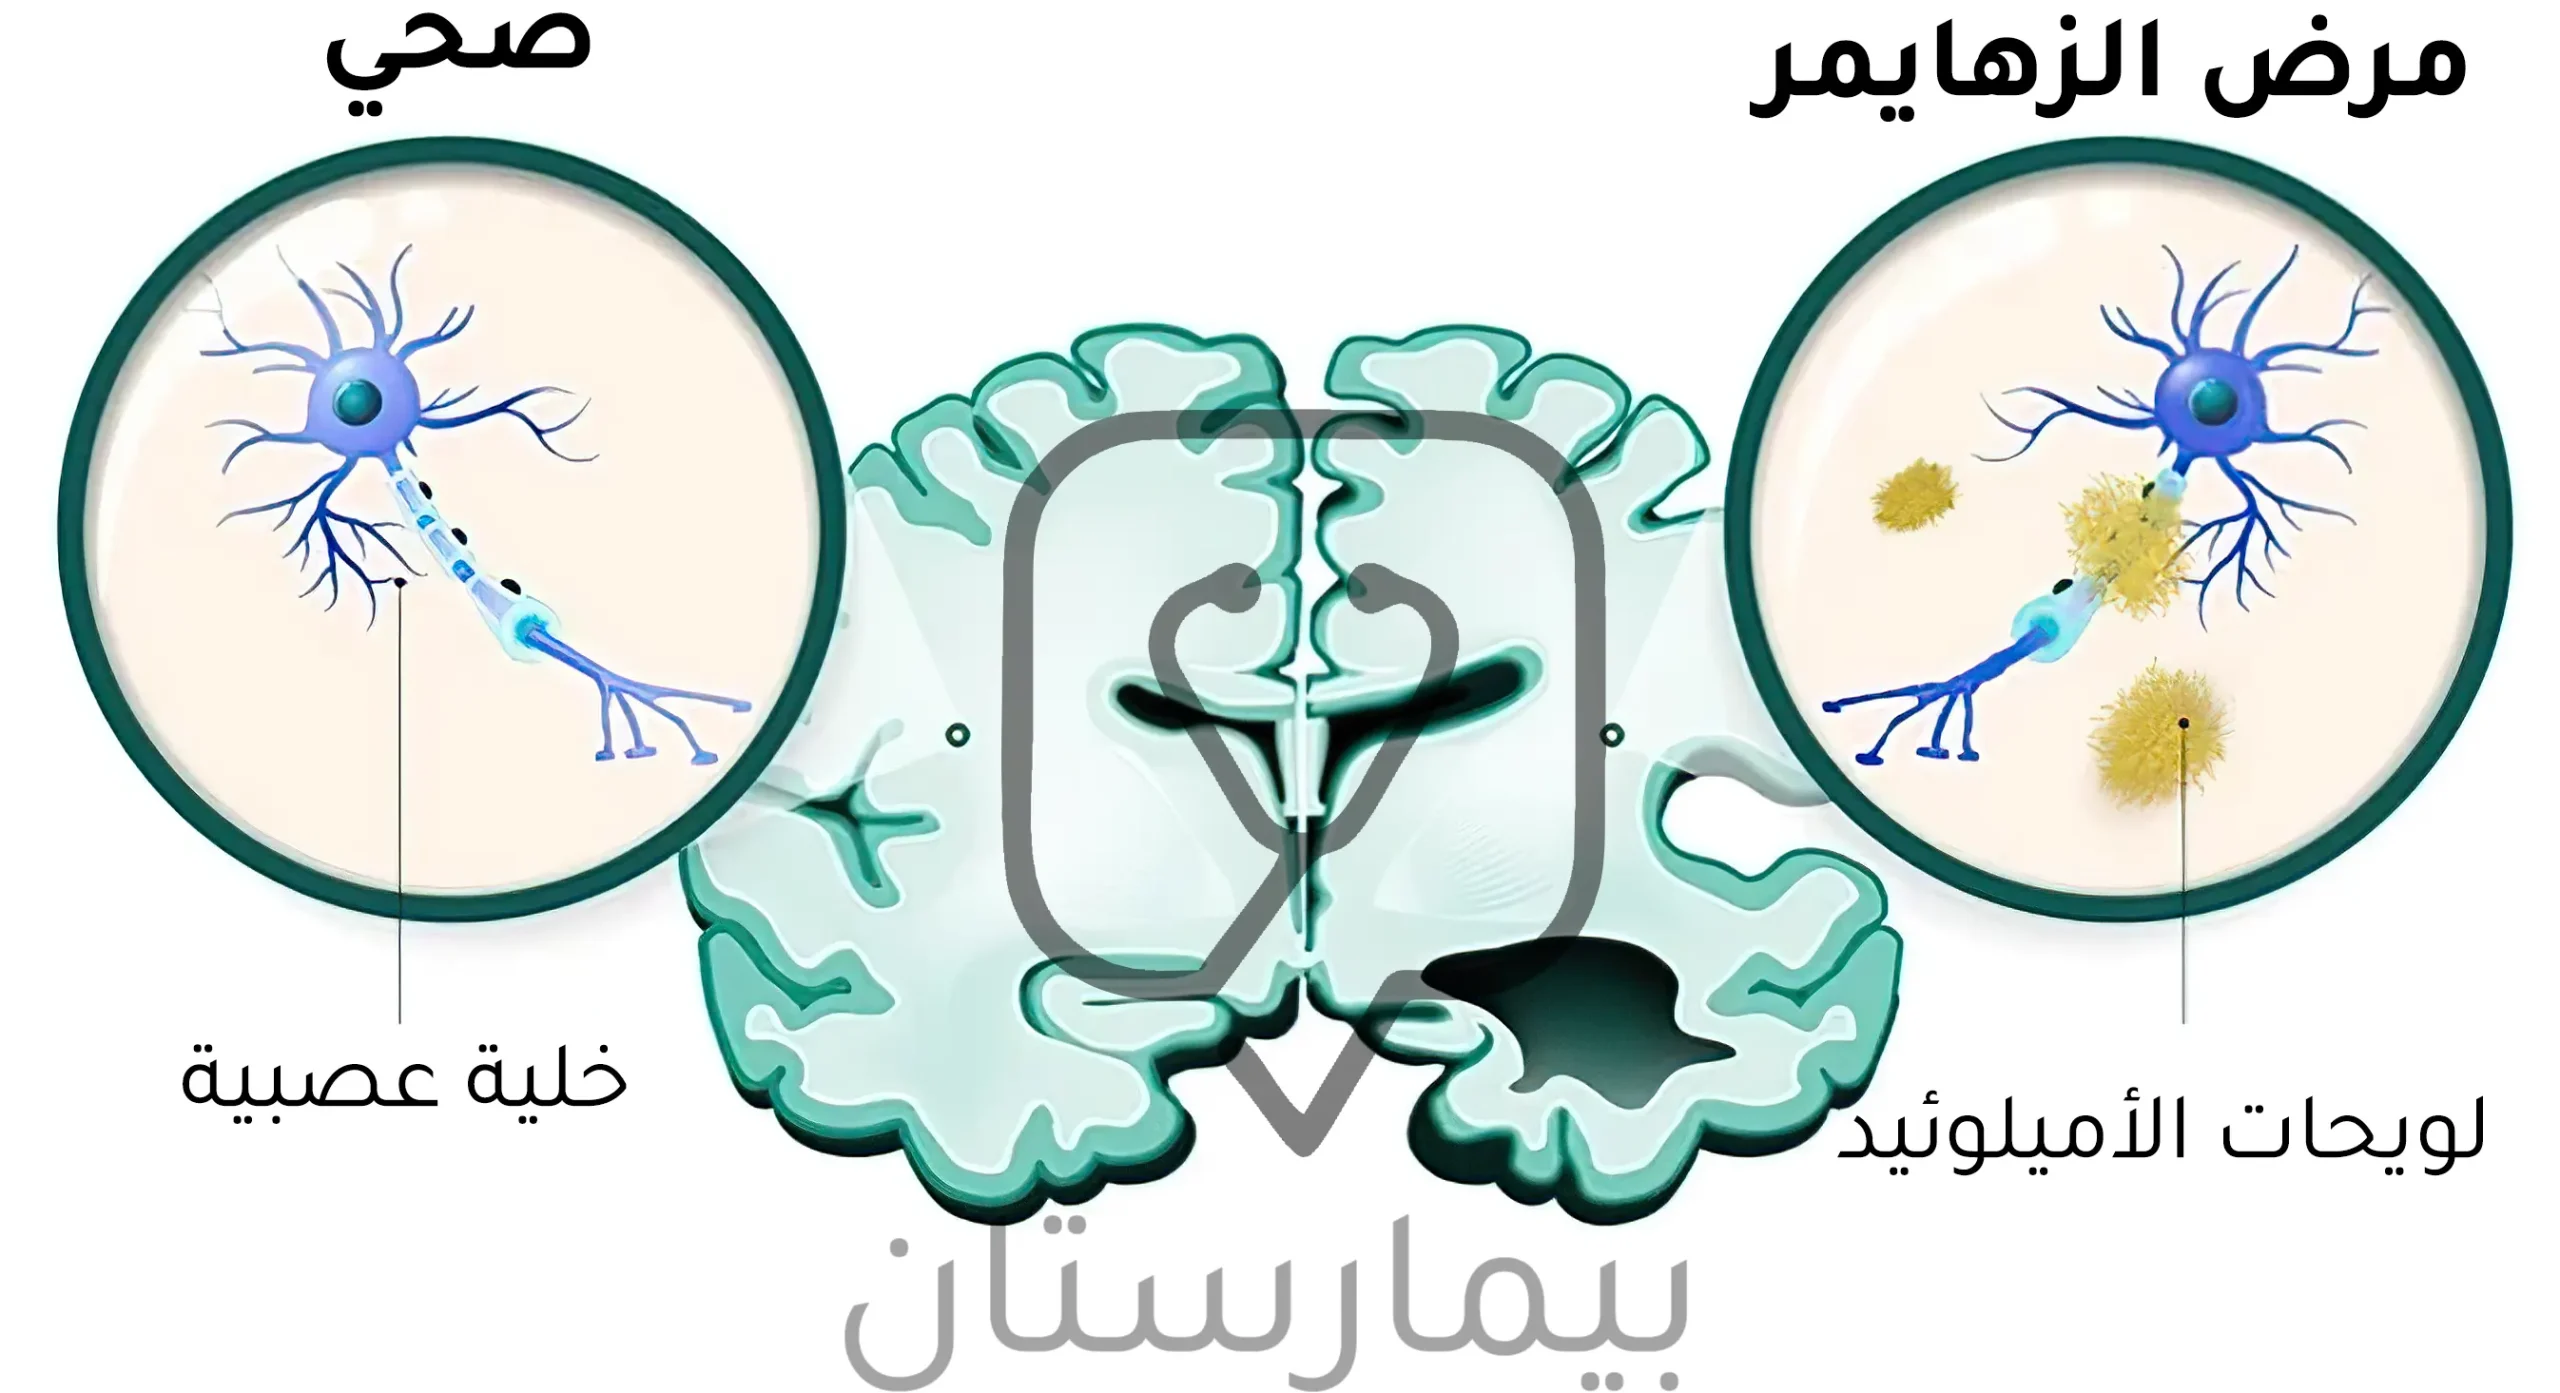 Image showing the causes of Alzheimer's disease (deposition of amyloid plaques)